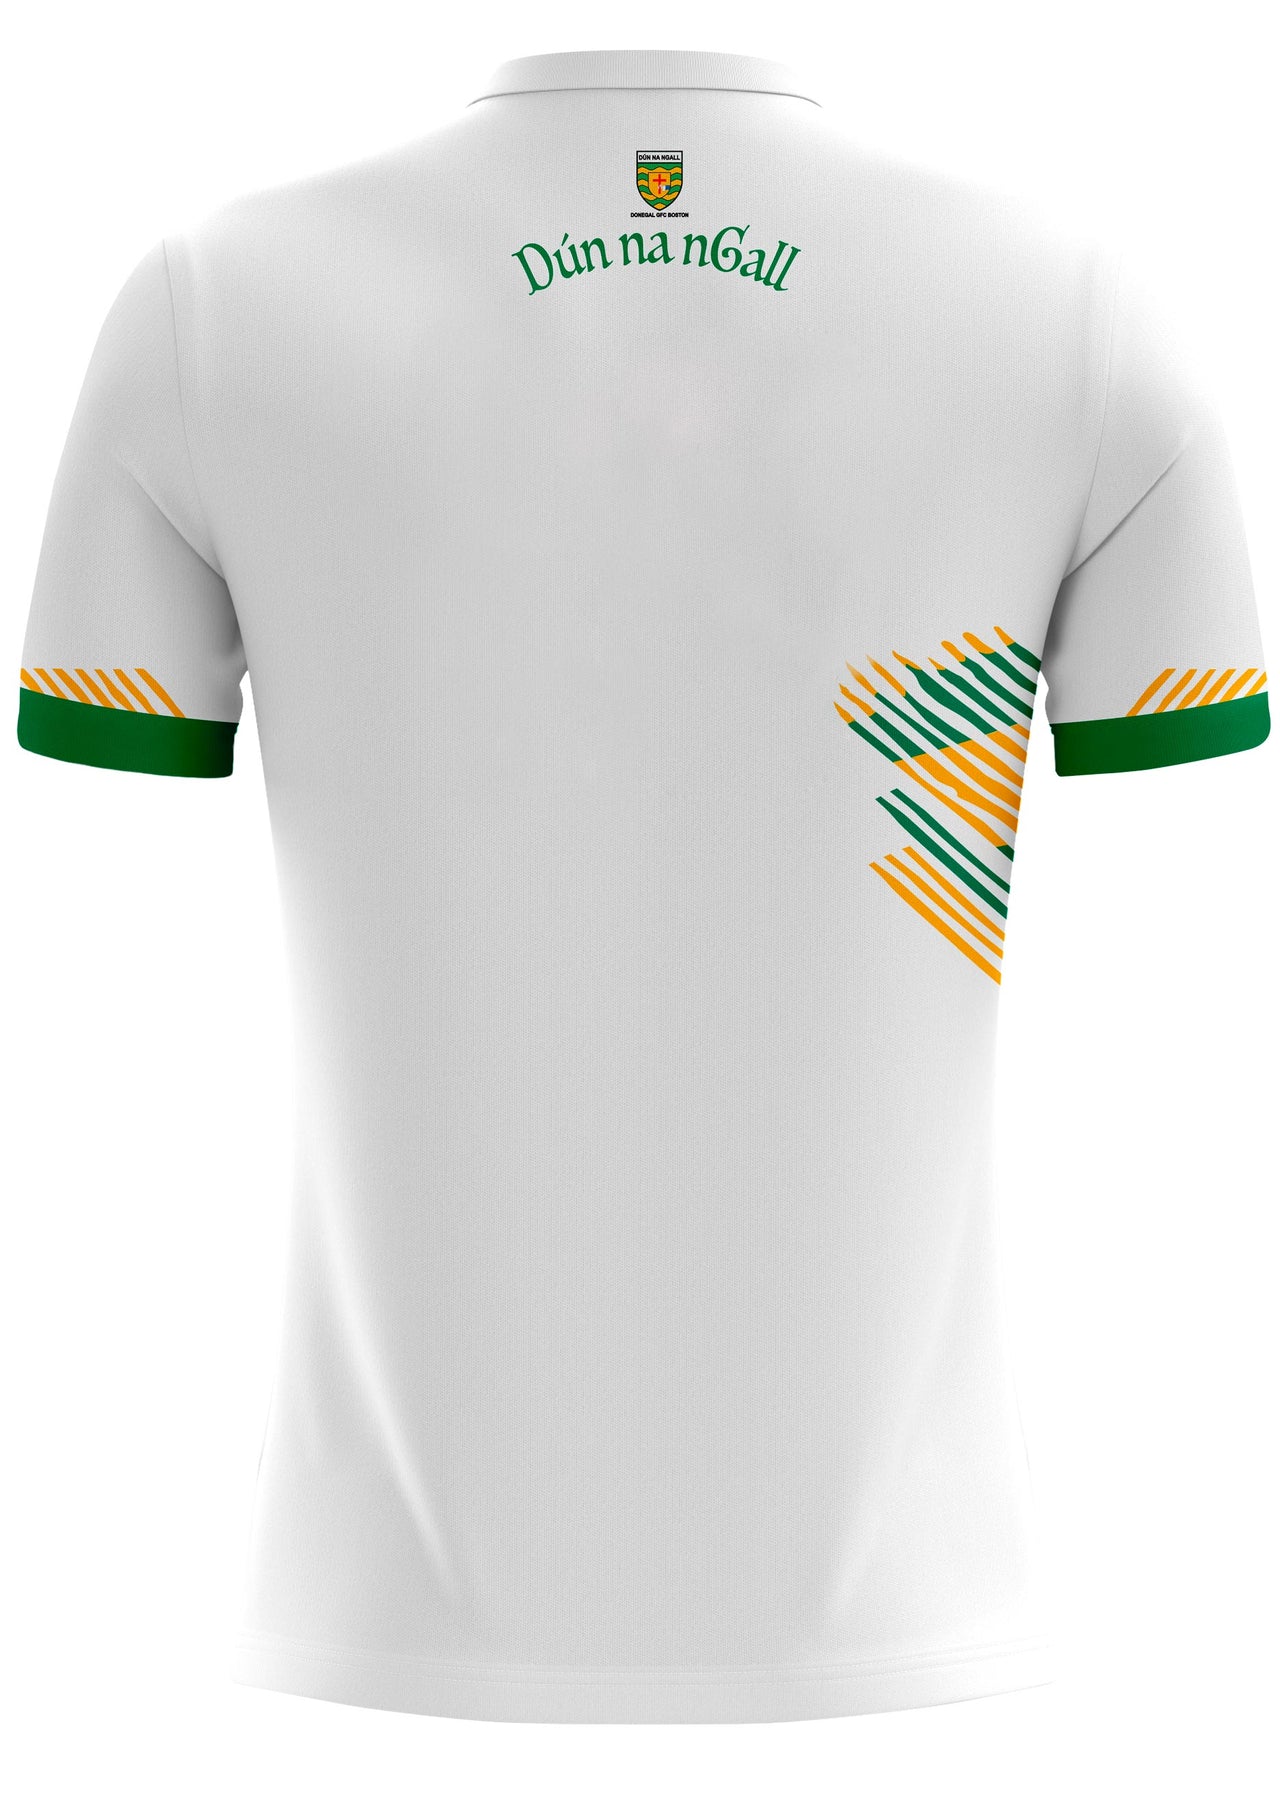 Donegal Boston Away Jersey Regular Fit Adult